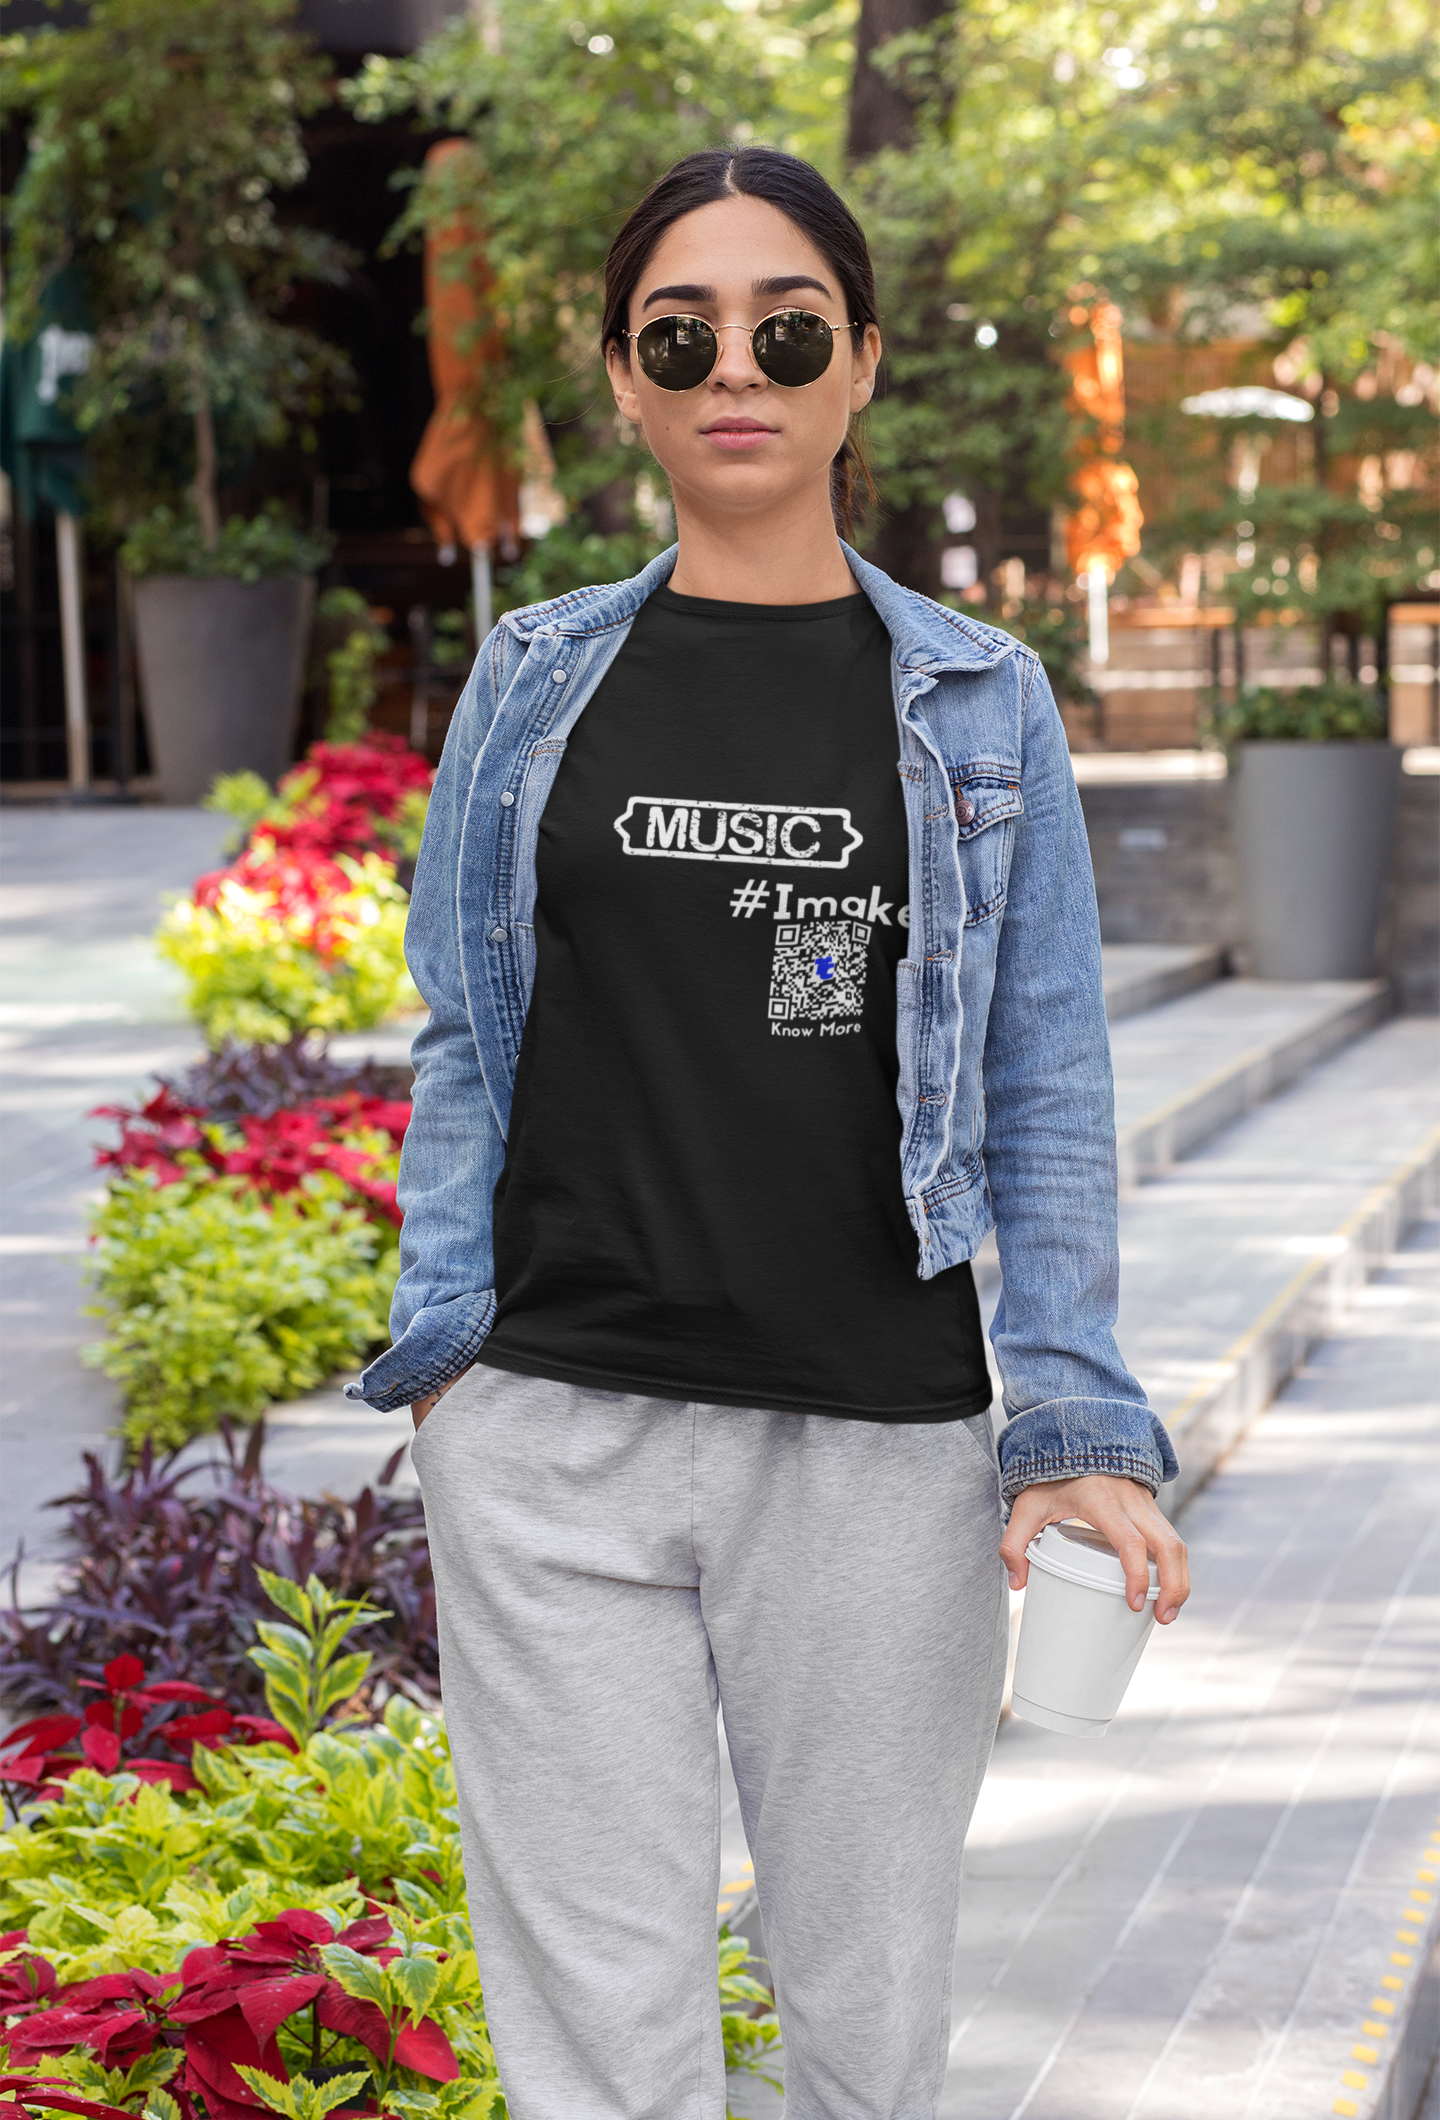 A female presenting person is walking outside in a city setting. They're in pants, denim jacket, & CLAIM It Tee™. The CLAIM™ reads {MUSIC} #Imake.